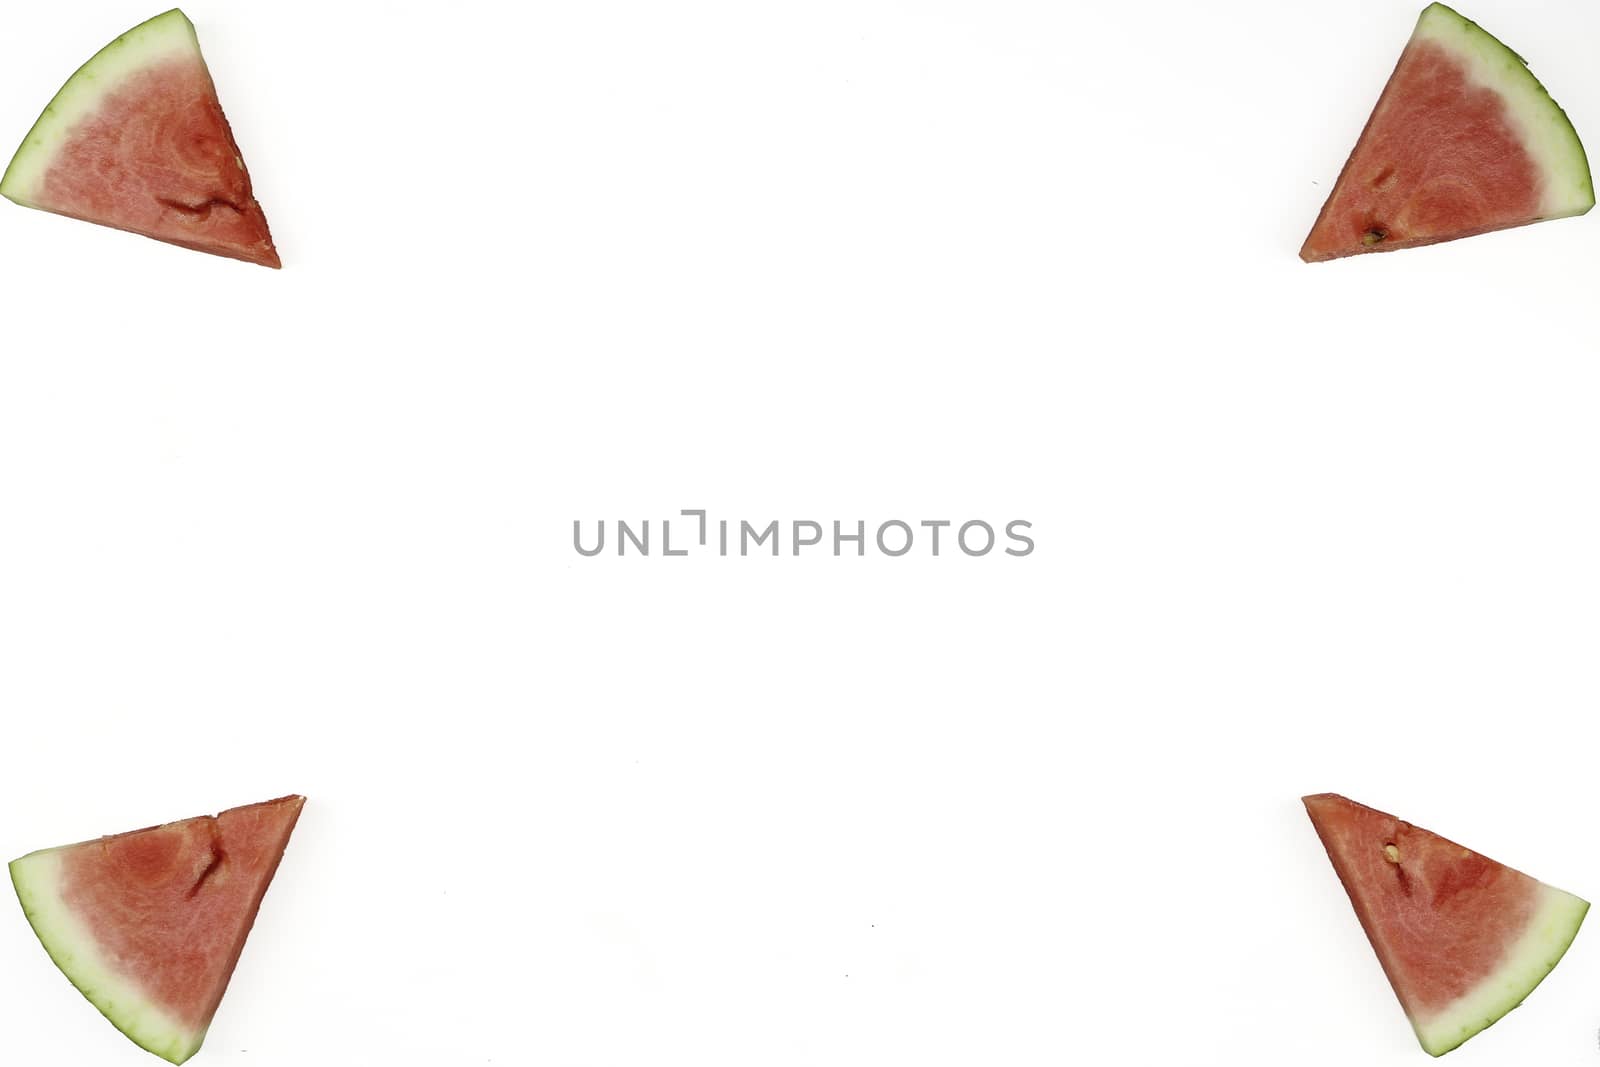 Triangular isolated slices of watermelon forming geometric games for copy space on a white background